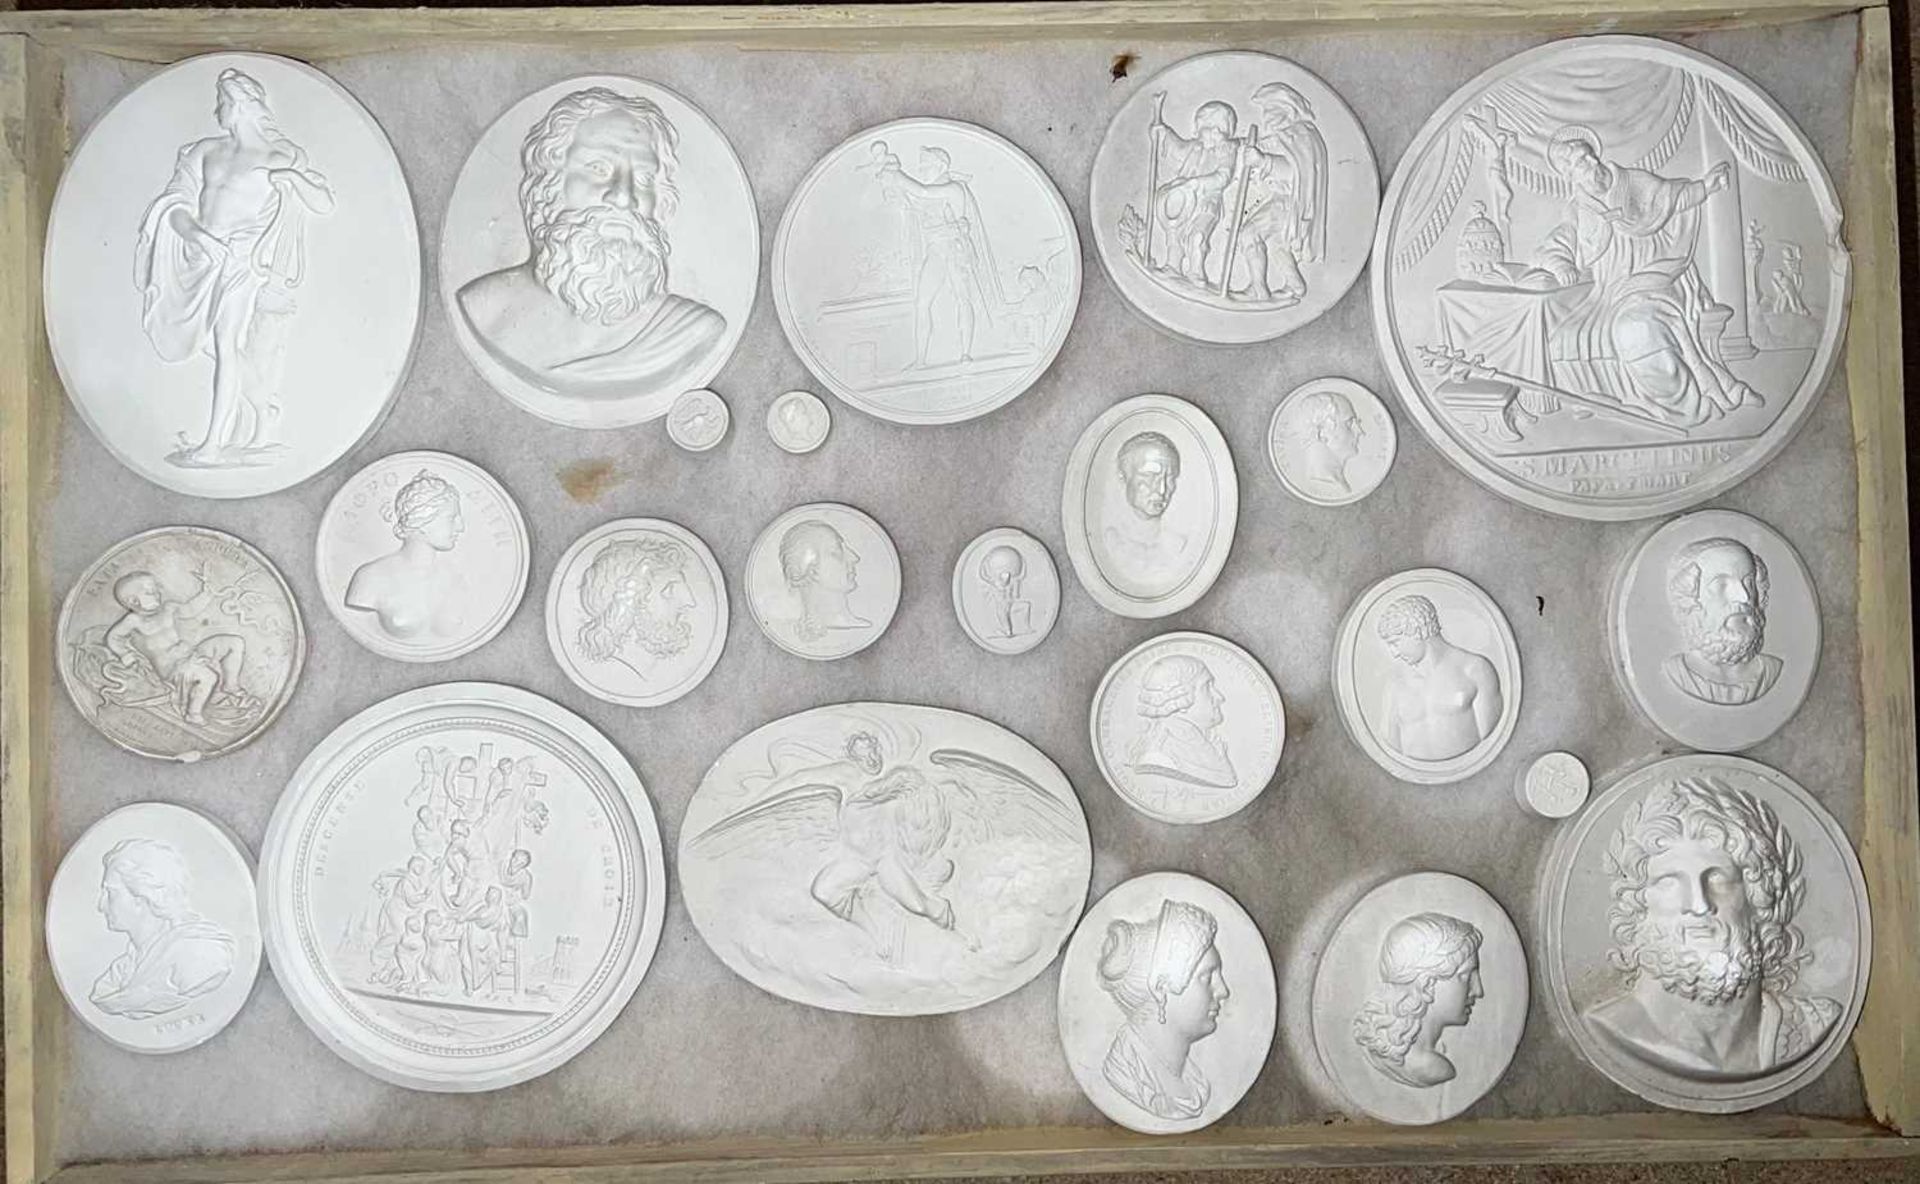 A LARGE COLLECTION OF 19TH CENTURY GRAND TOUR PLASTER INTAGLIOS, 225 APPROX. - Image 11 of 12